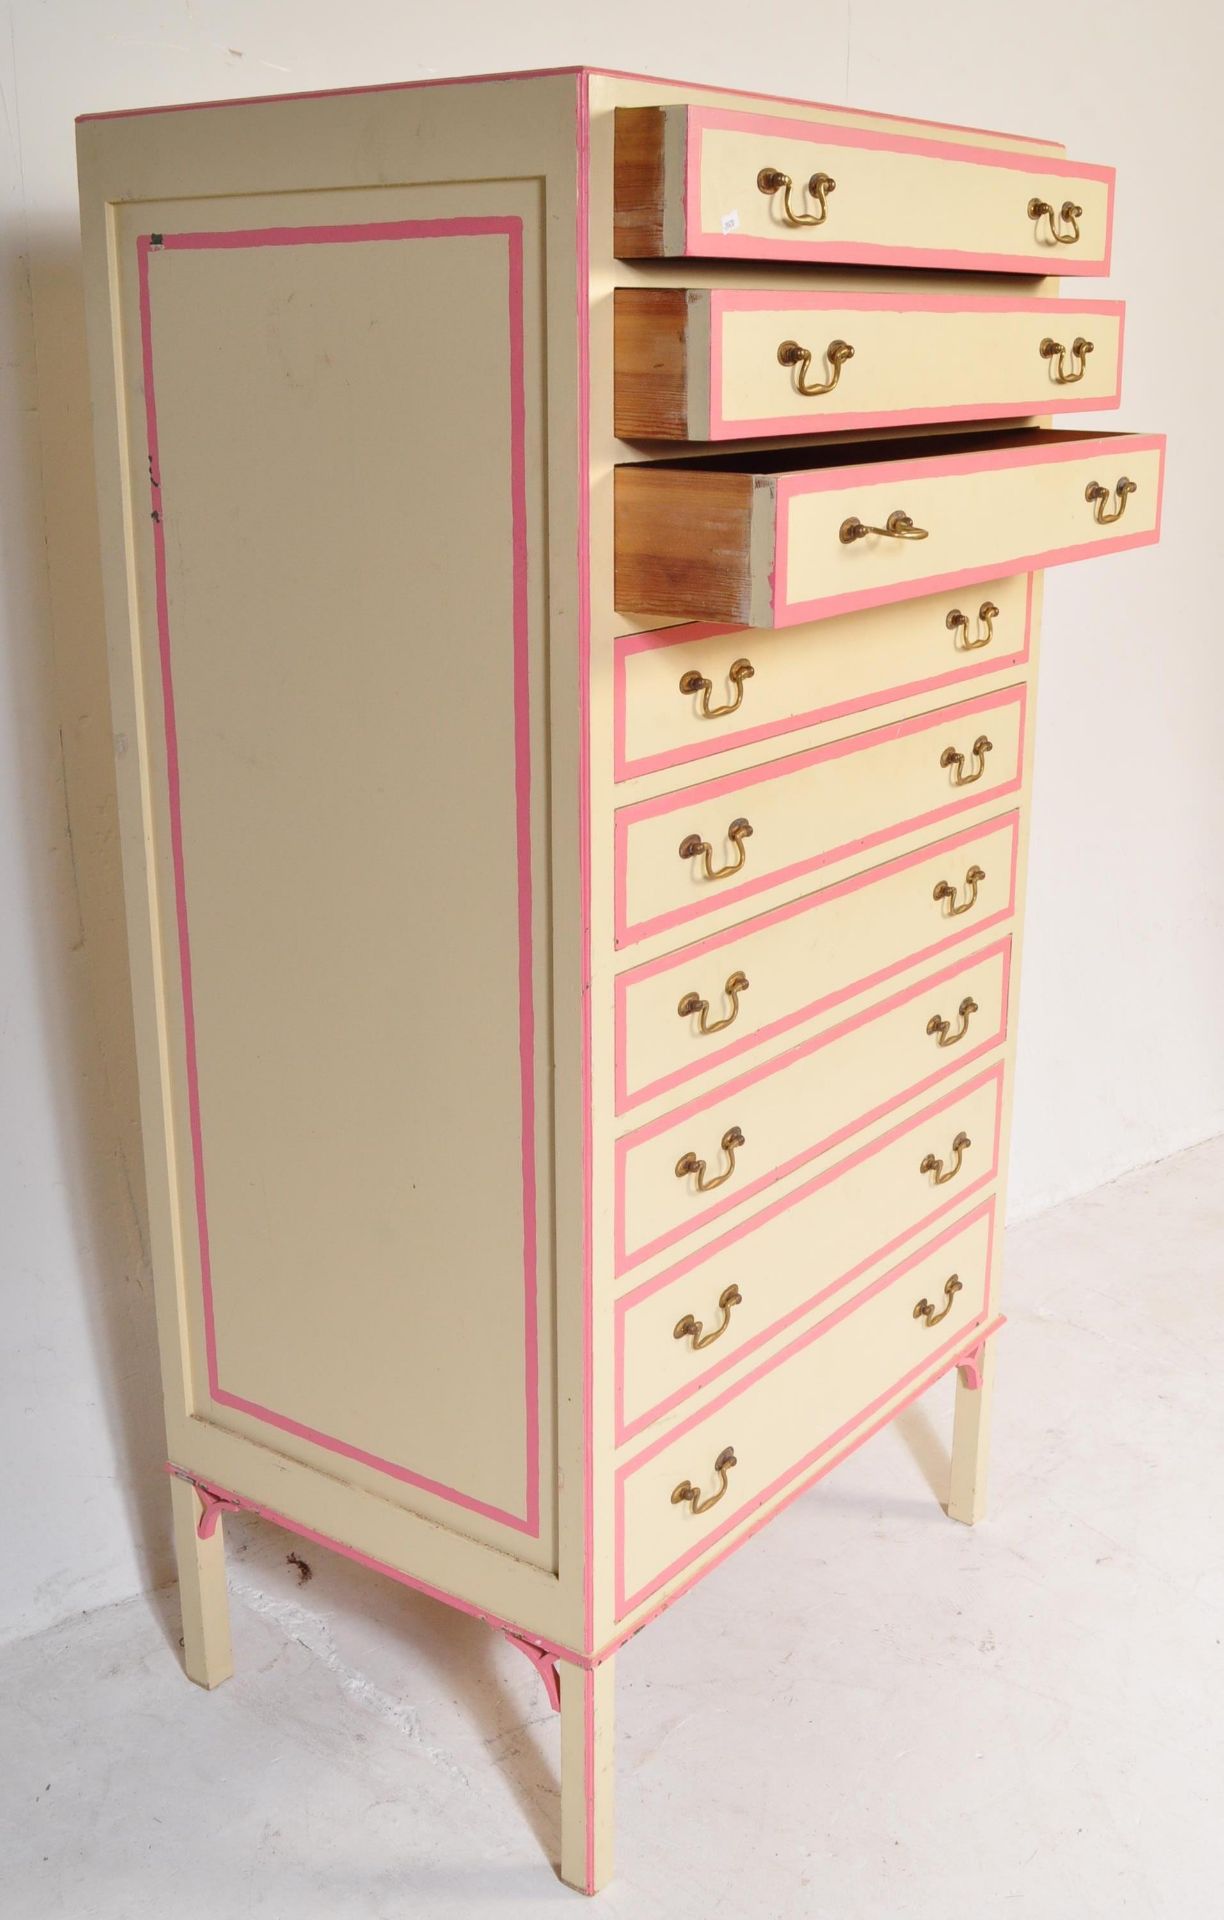 RETRO WOODEN PAINTED CHEST OF DRAWERS TALLBOY - Image 2 of 5